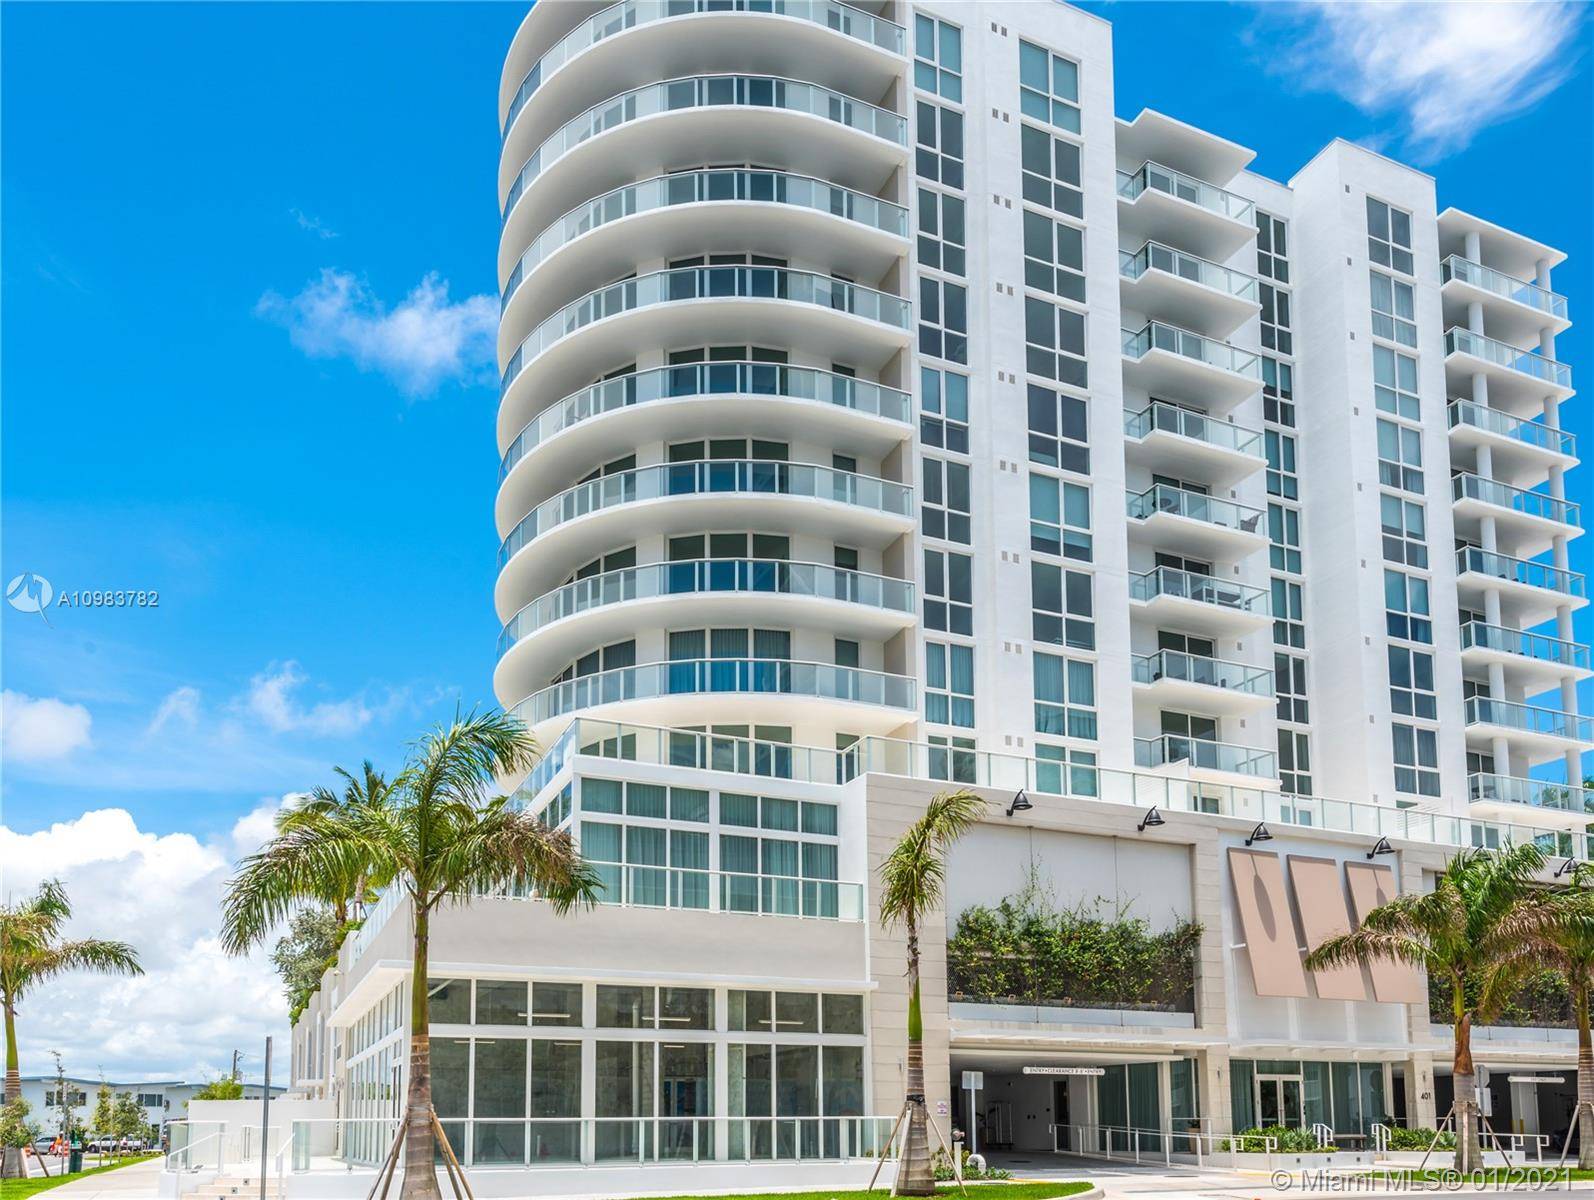 Magnificent newly built 7th floor SOUTH WEST facing INTRACOASTAL view condo, 2 bedroom 3 bath, living dining den with sofa sleeper, balcony, turn key completely furnished with Gale Signature package ...